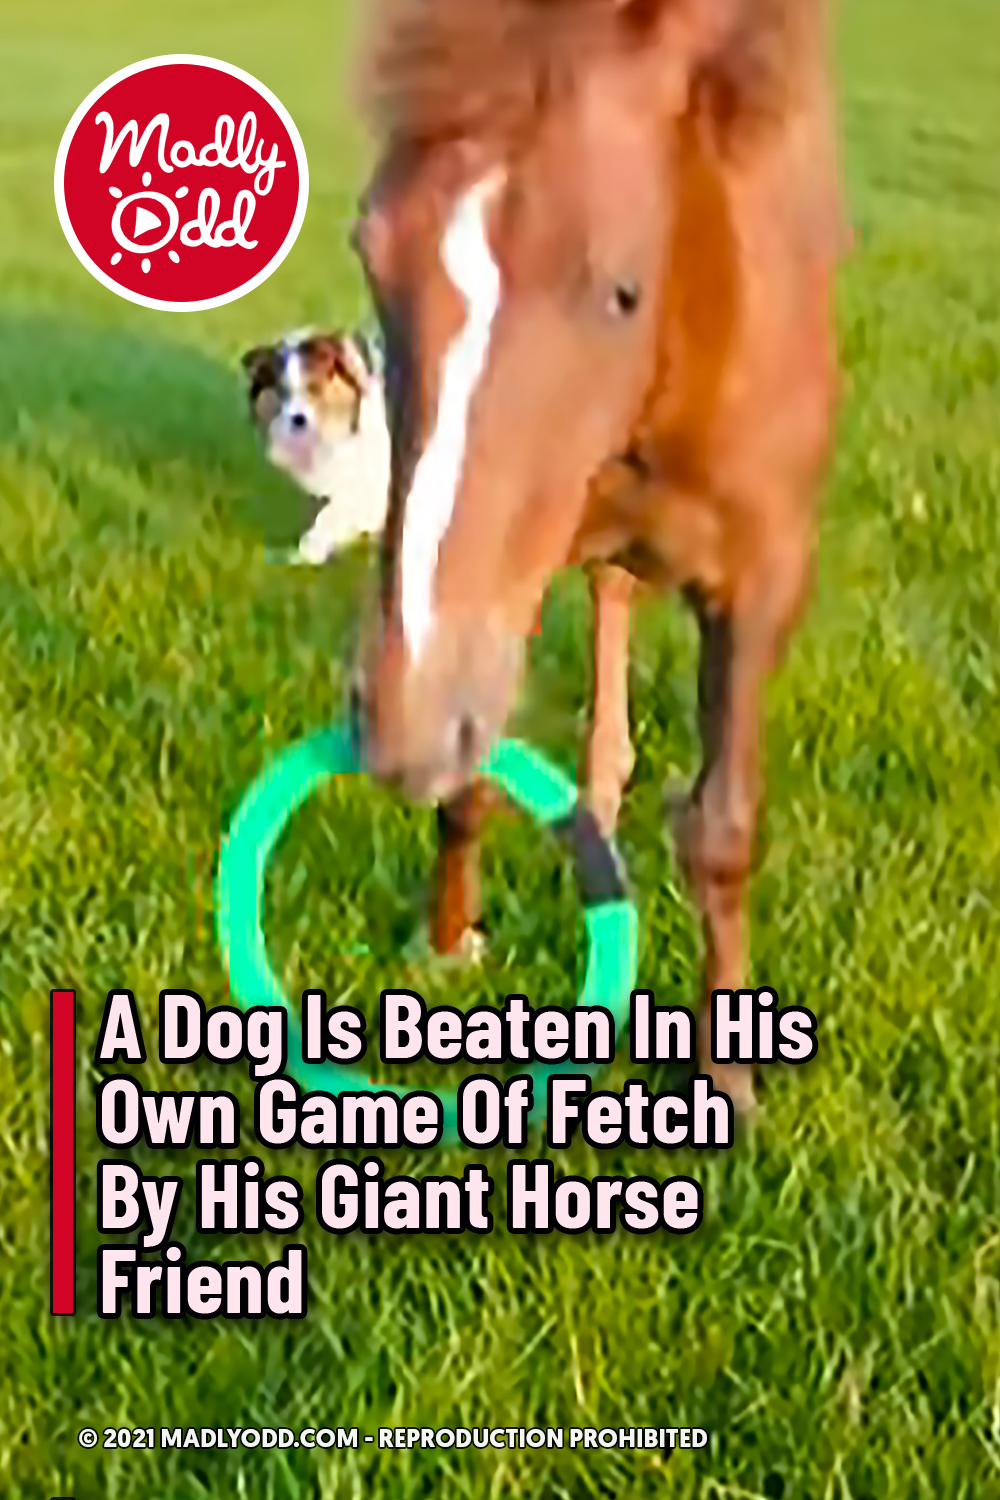 A Dog Is Beaten In His Own Game Of Fetch By His Giant Horse Friend